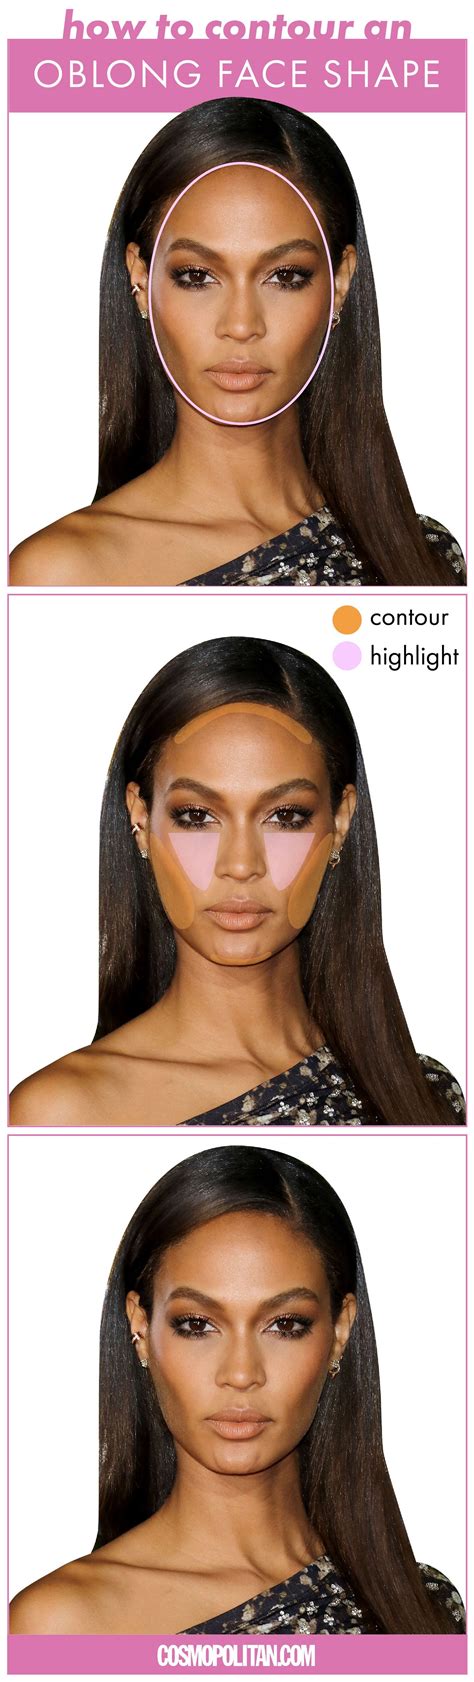 surprise 2020 is the year you finally learn how to contour face shape contour long face